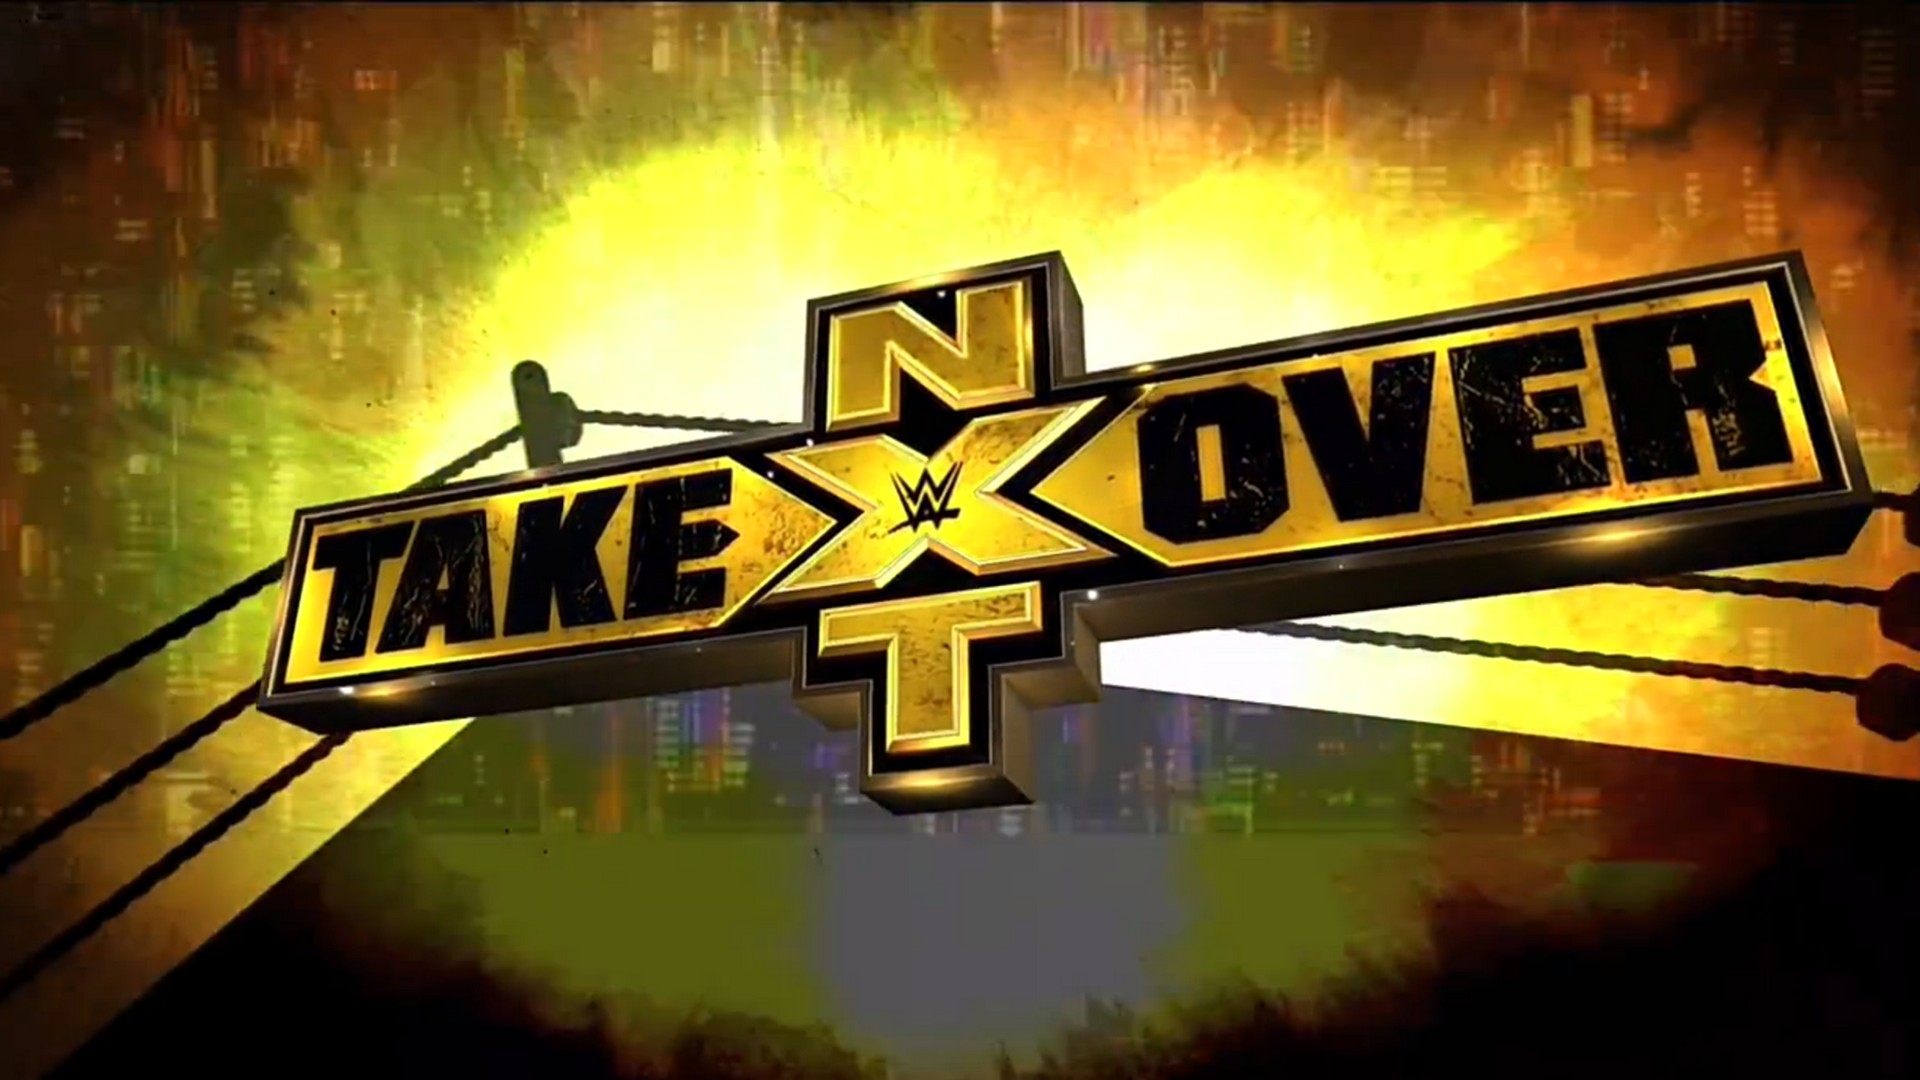 NXT Takeover Wallpaper HD with high-resolution 1920x1080 pixel. You can use this wallpaper for your Desktop Computer Backgrounds, Mac Wallpapers, Android Lock screen or iPhone Screensavers and another smartphone device